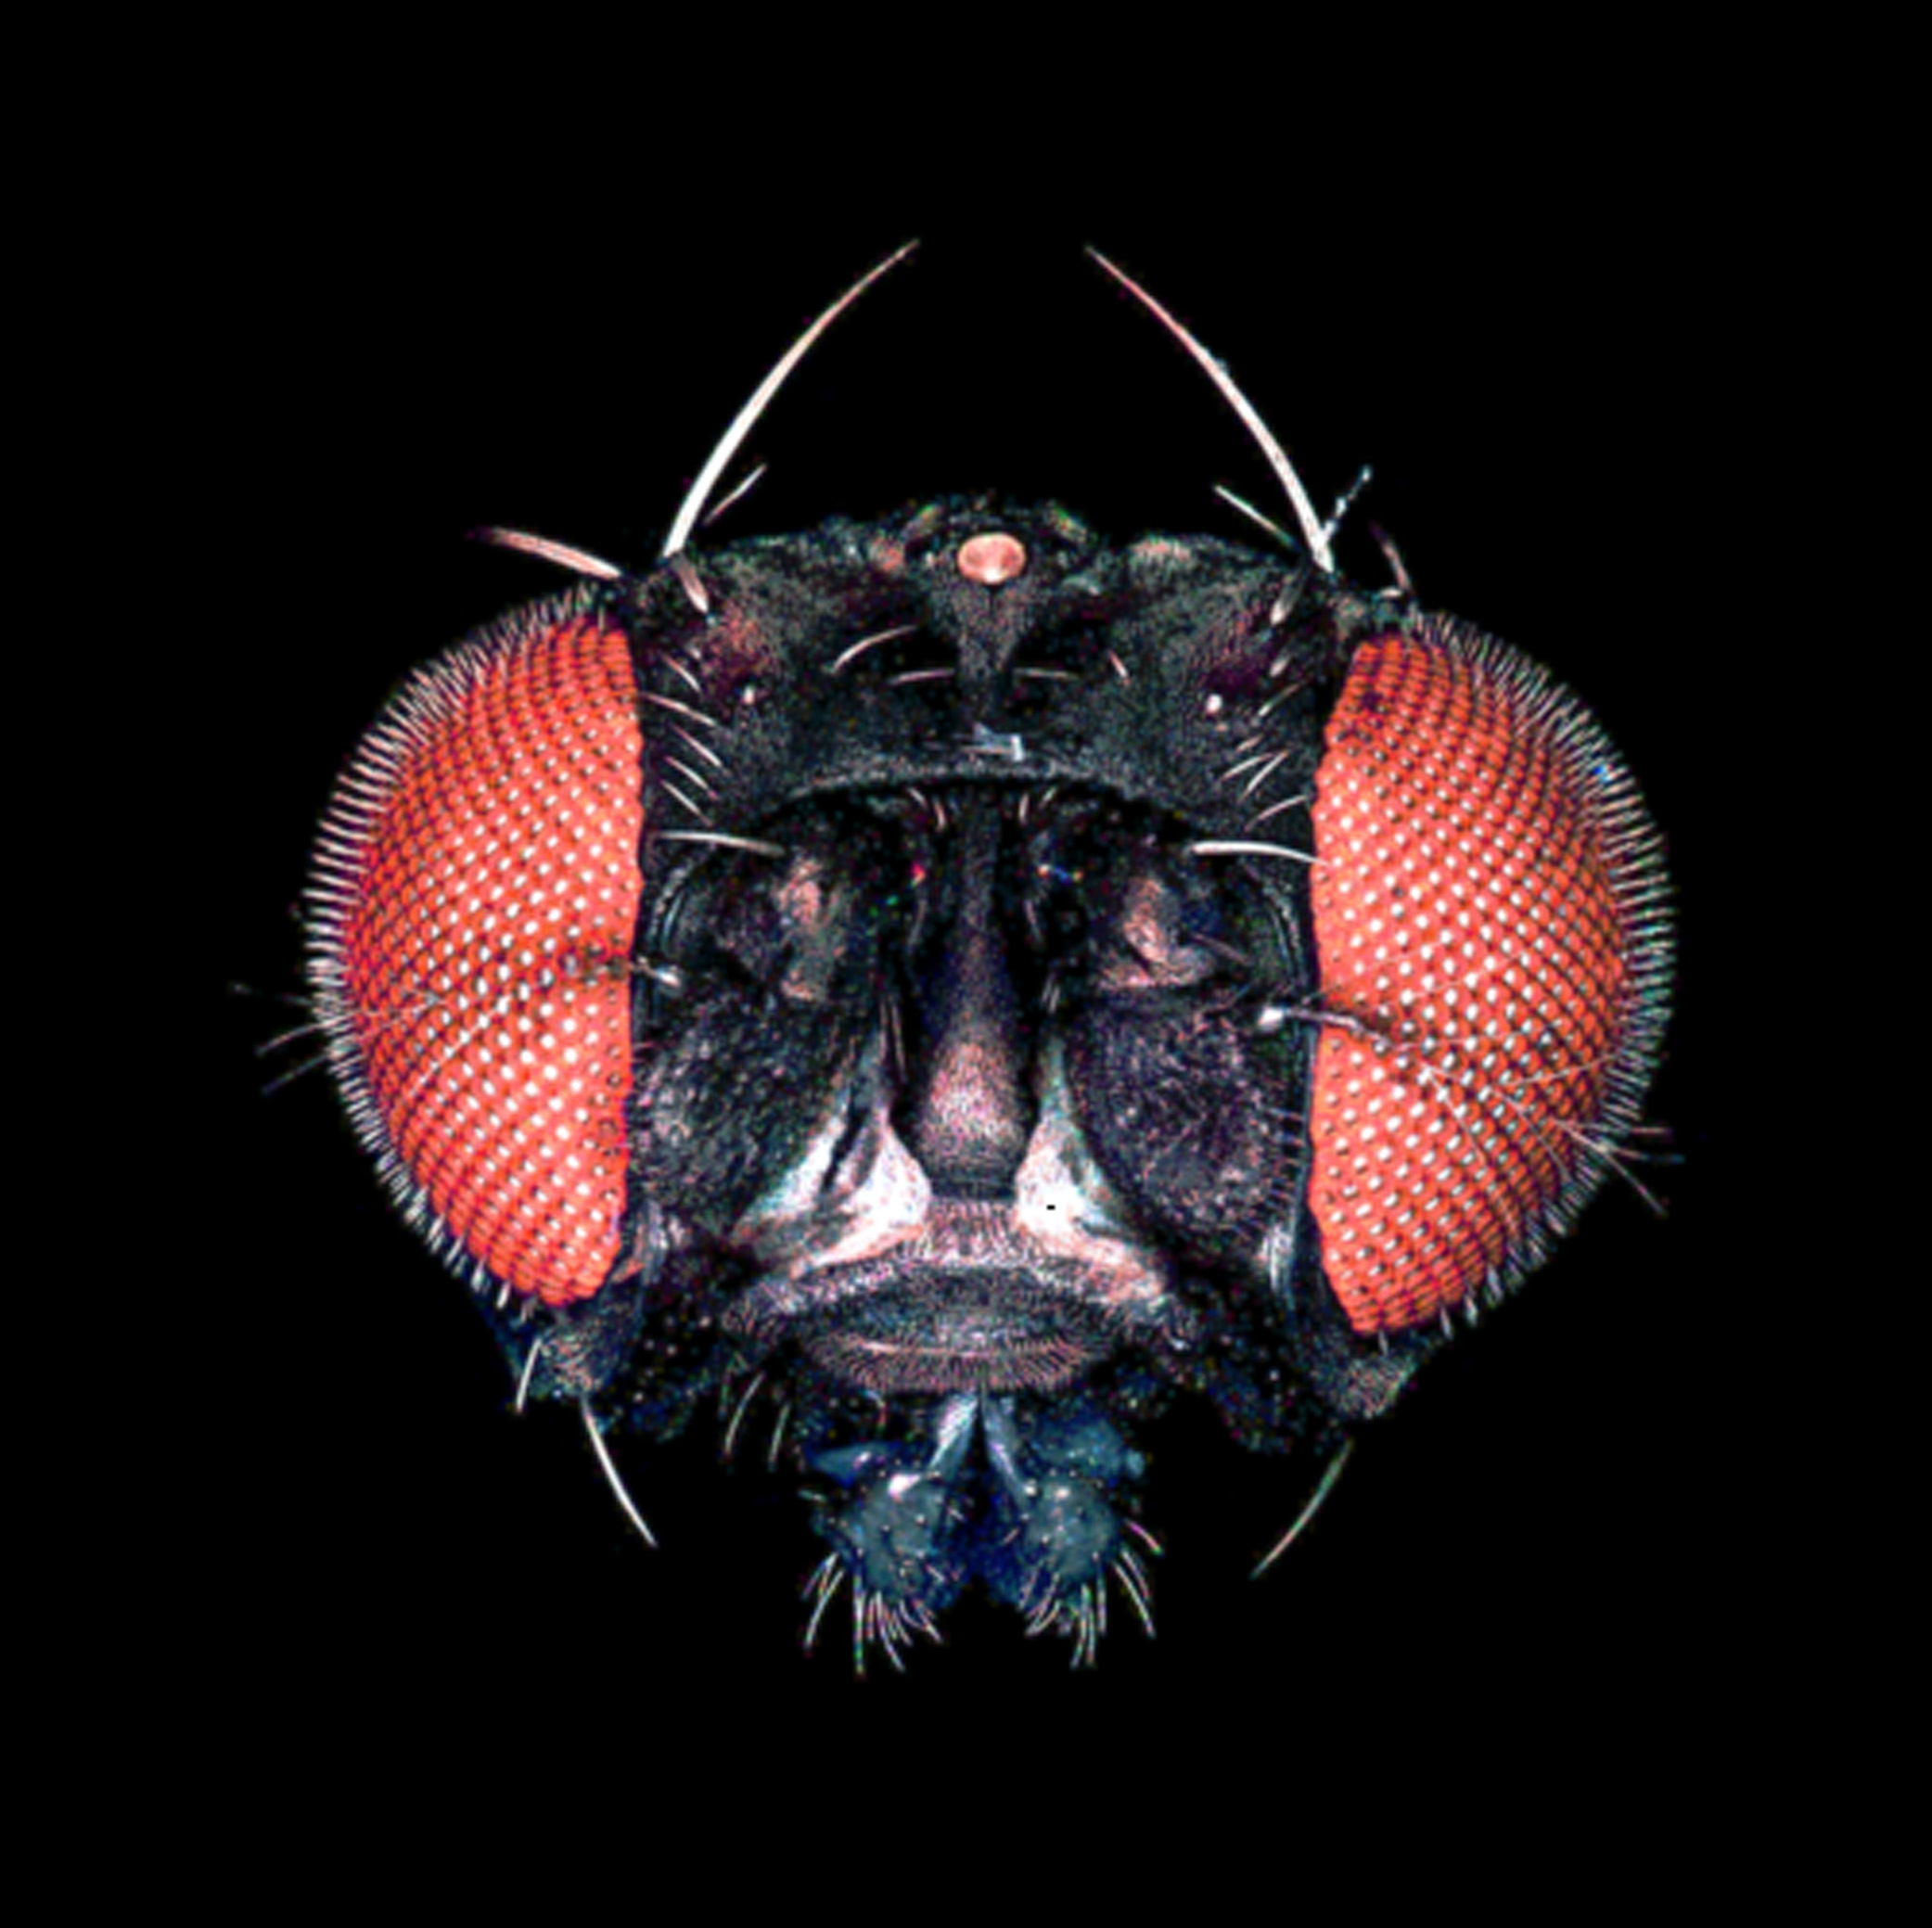 How insects detect color